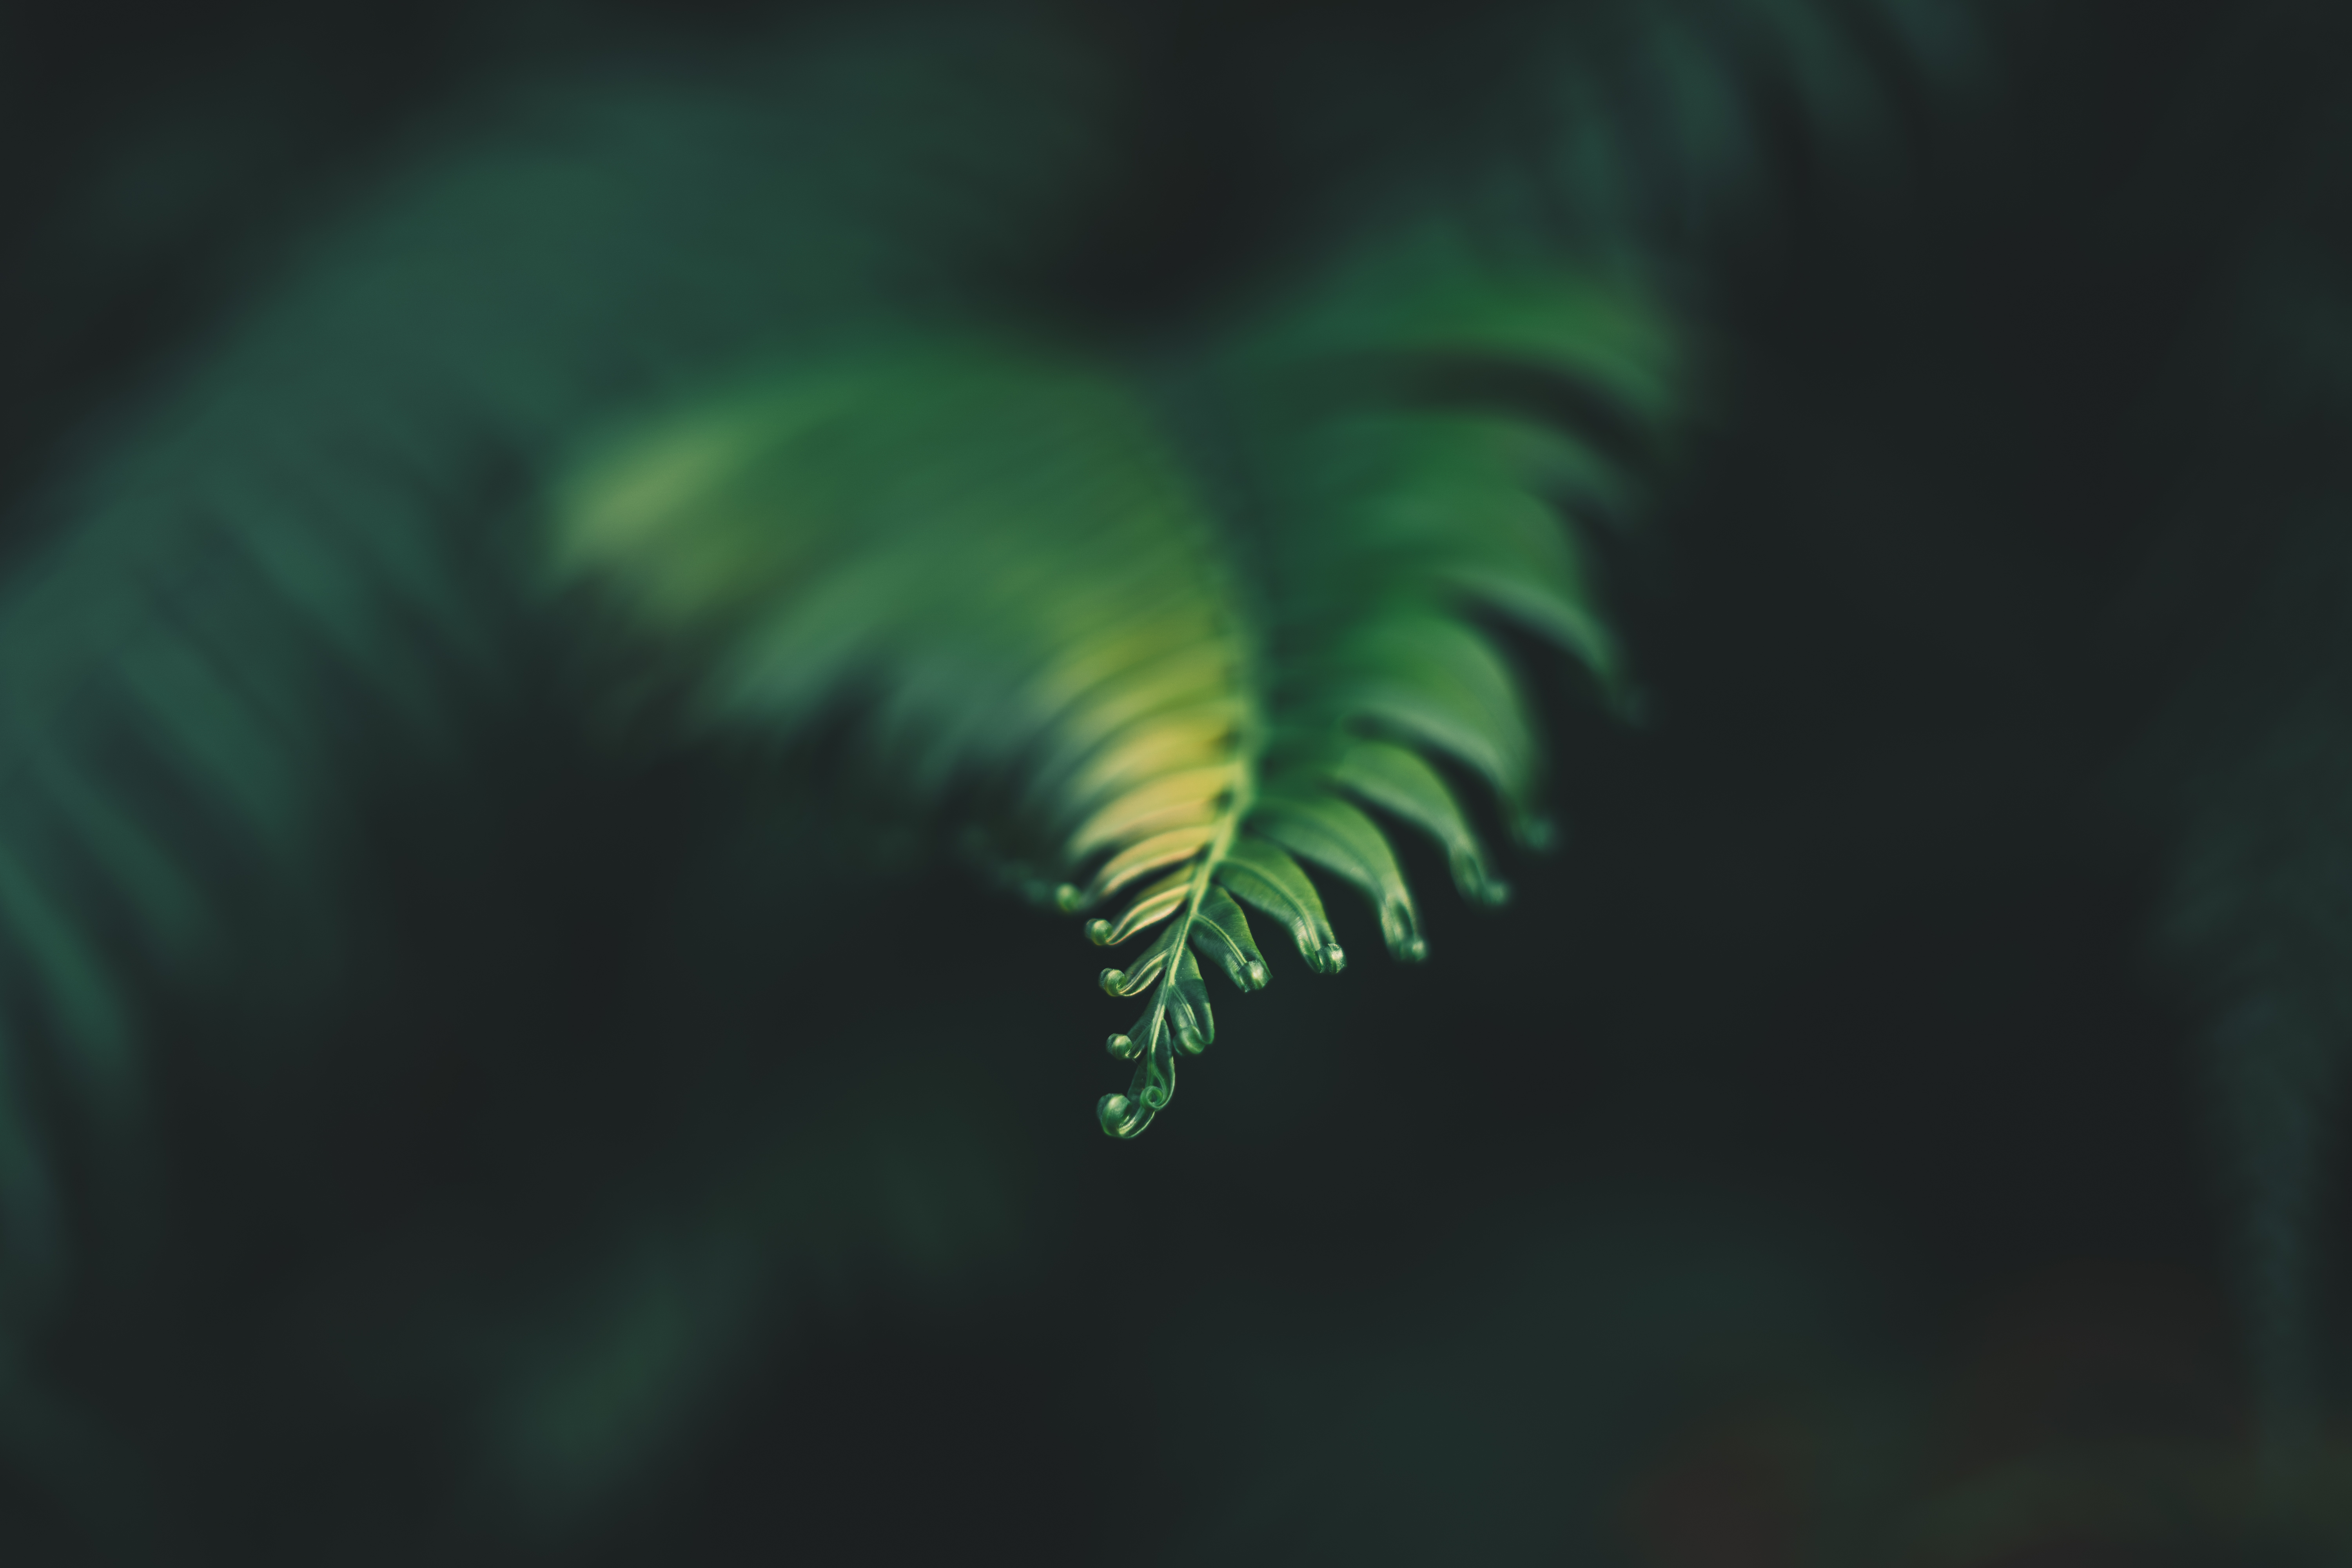 carved, green, plant, macro, blur, smooth, sheet, leaf phone background